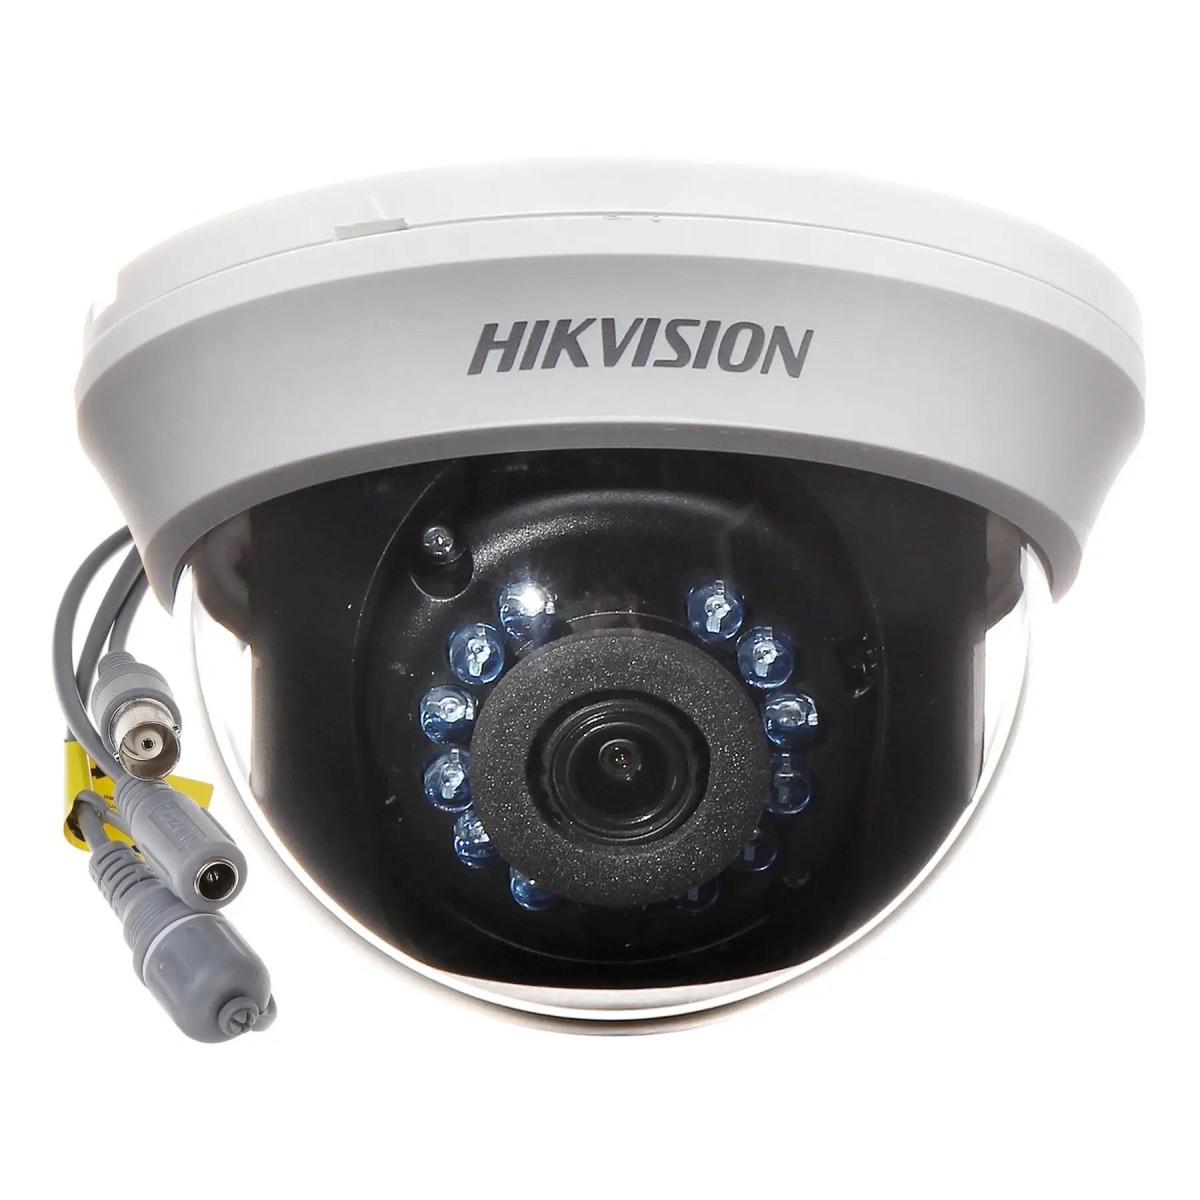 Камера Hikvision DS-2CE56D0T-IRMMF (C) (2.8) 98_98.jpg - фото 2